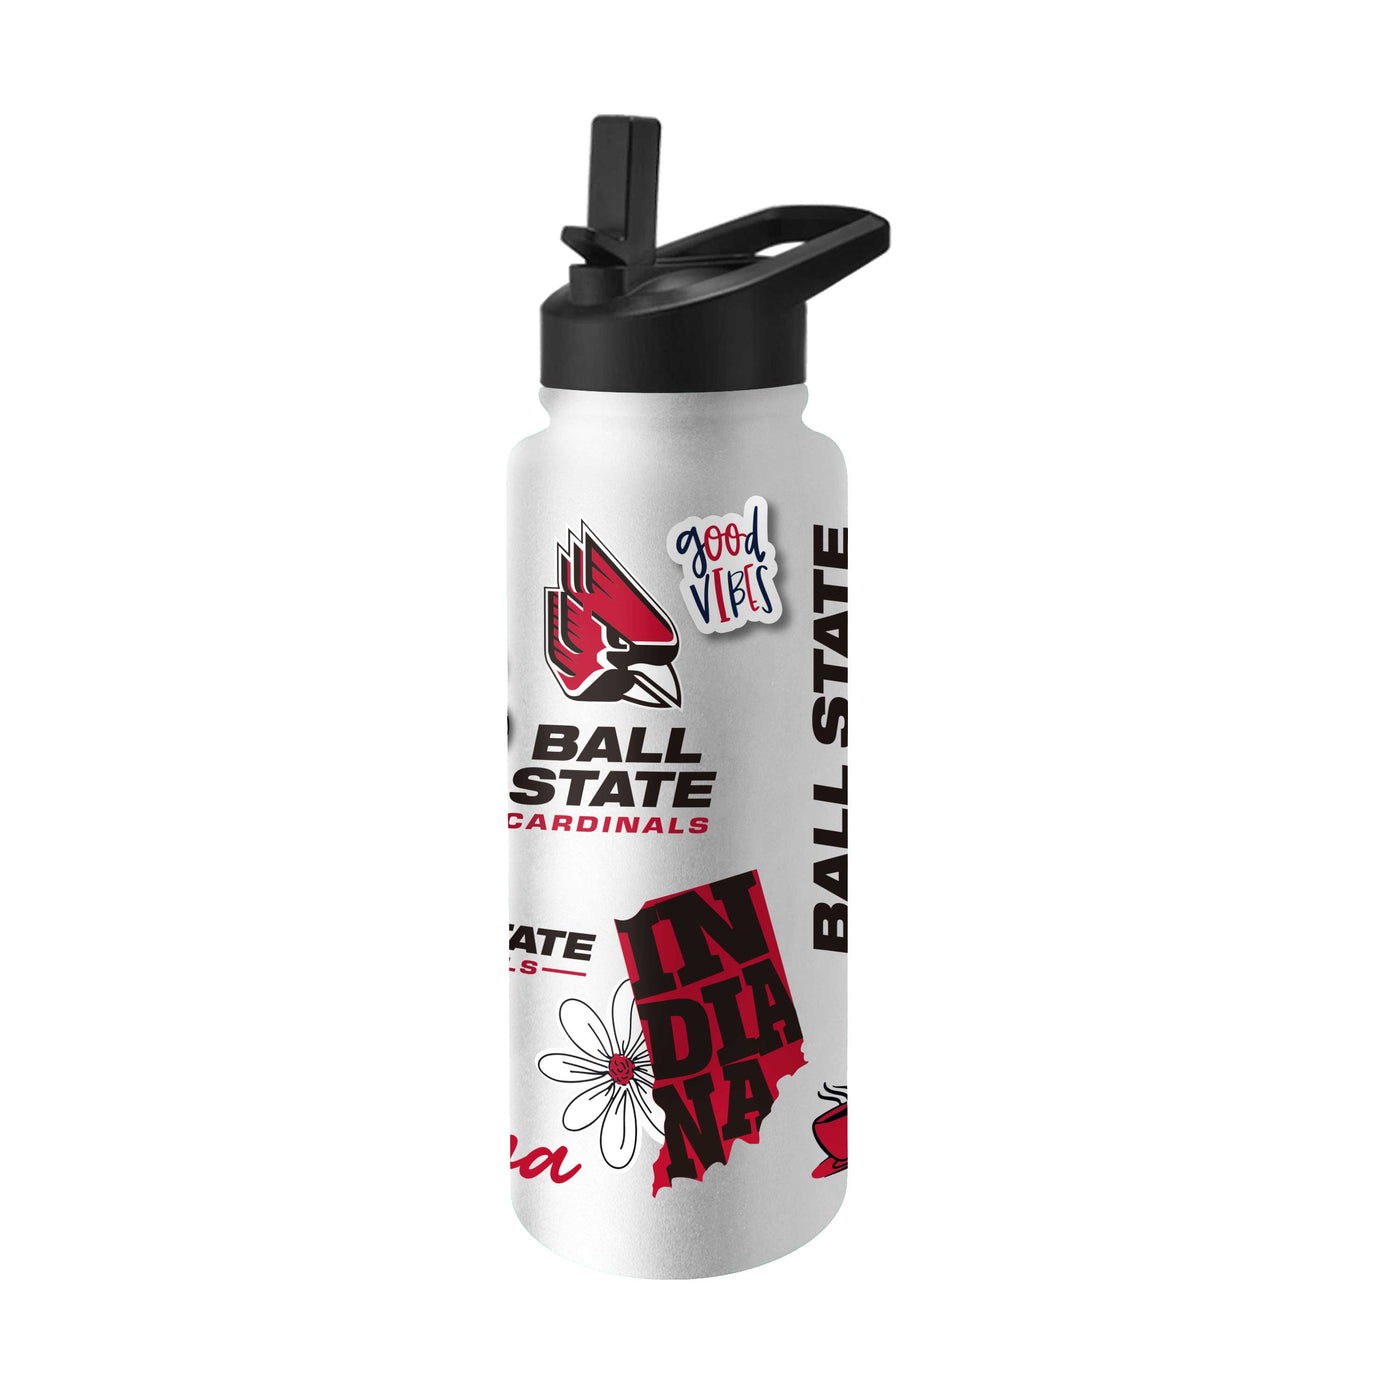 Ball State 34oz Native Quencher Bottle